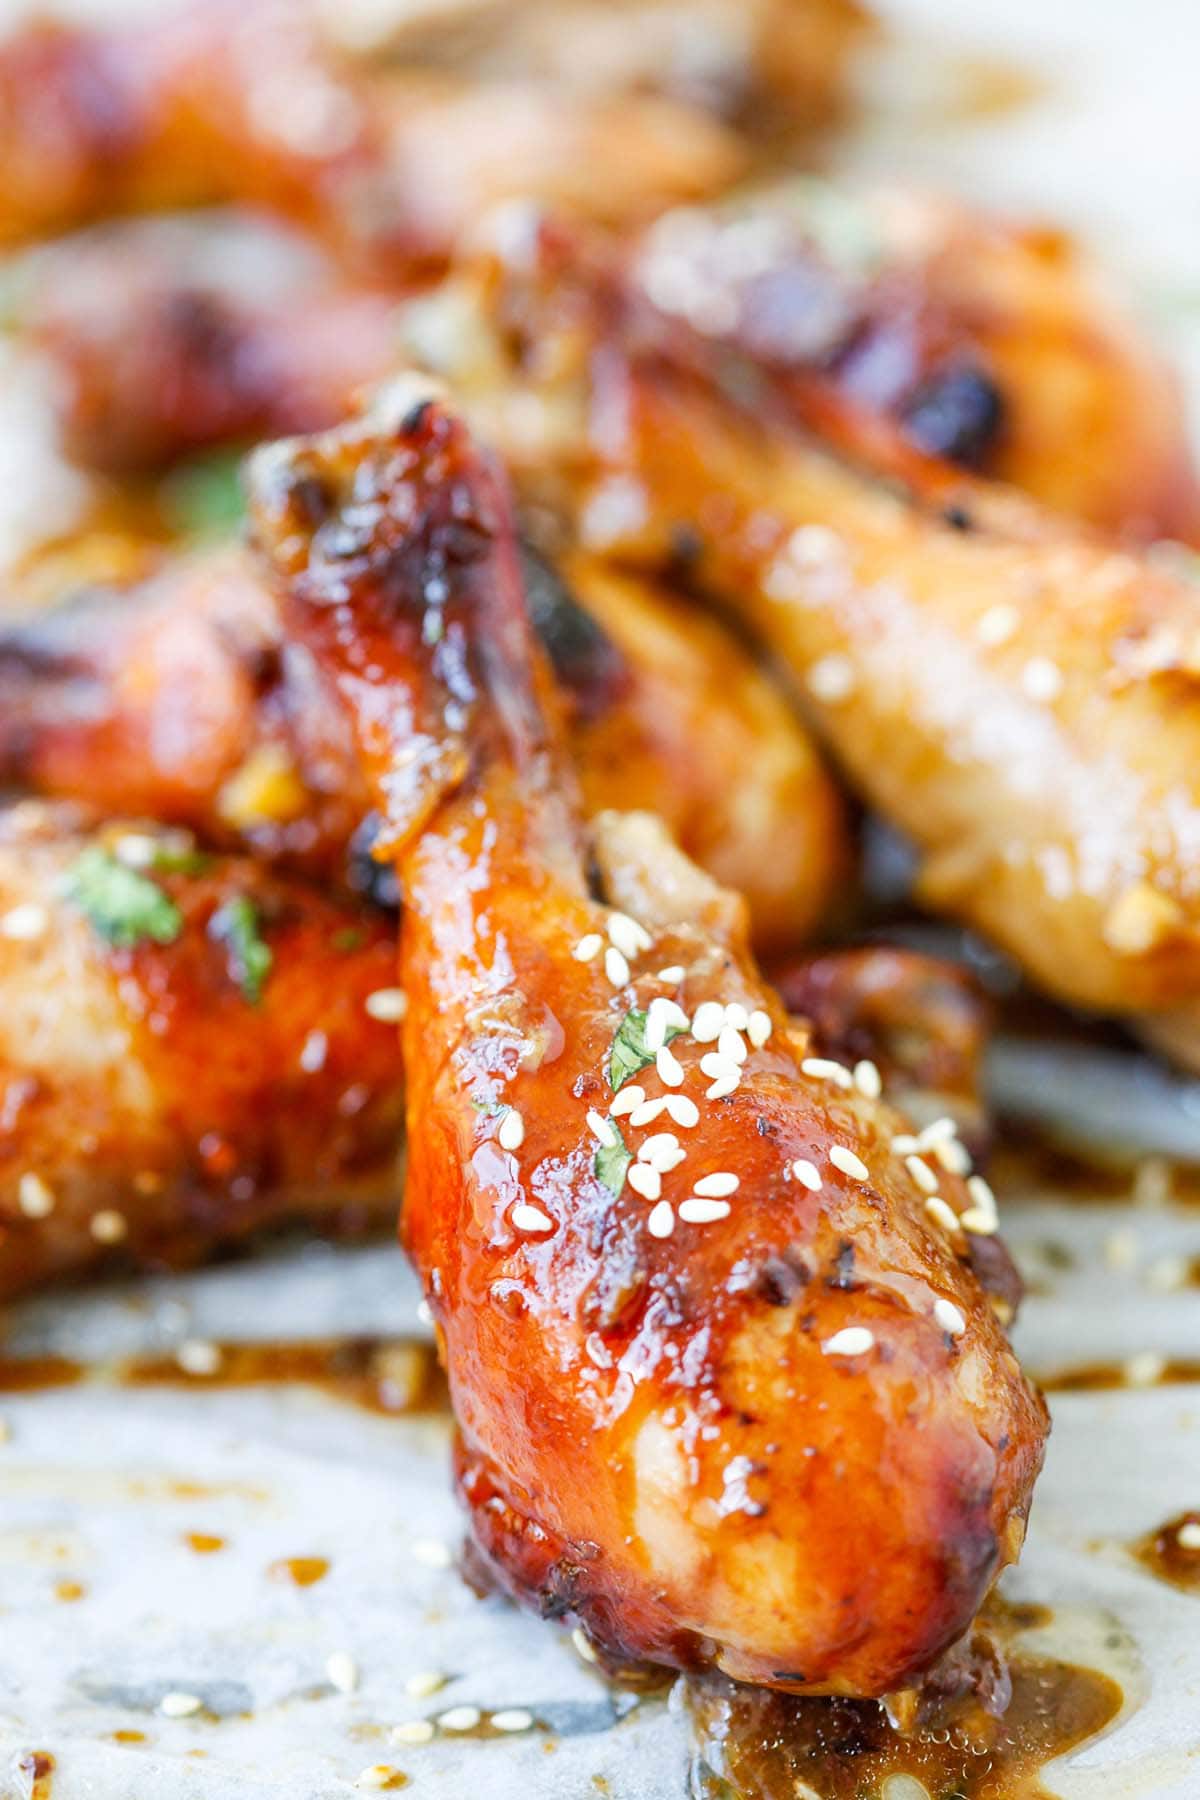 Easy homemade Baked Hoisin Chicken topped with sesame seeds ready to serve.